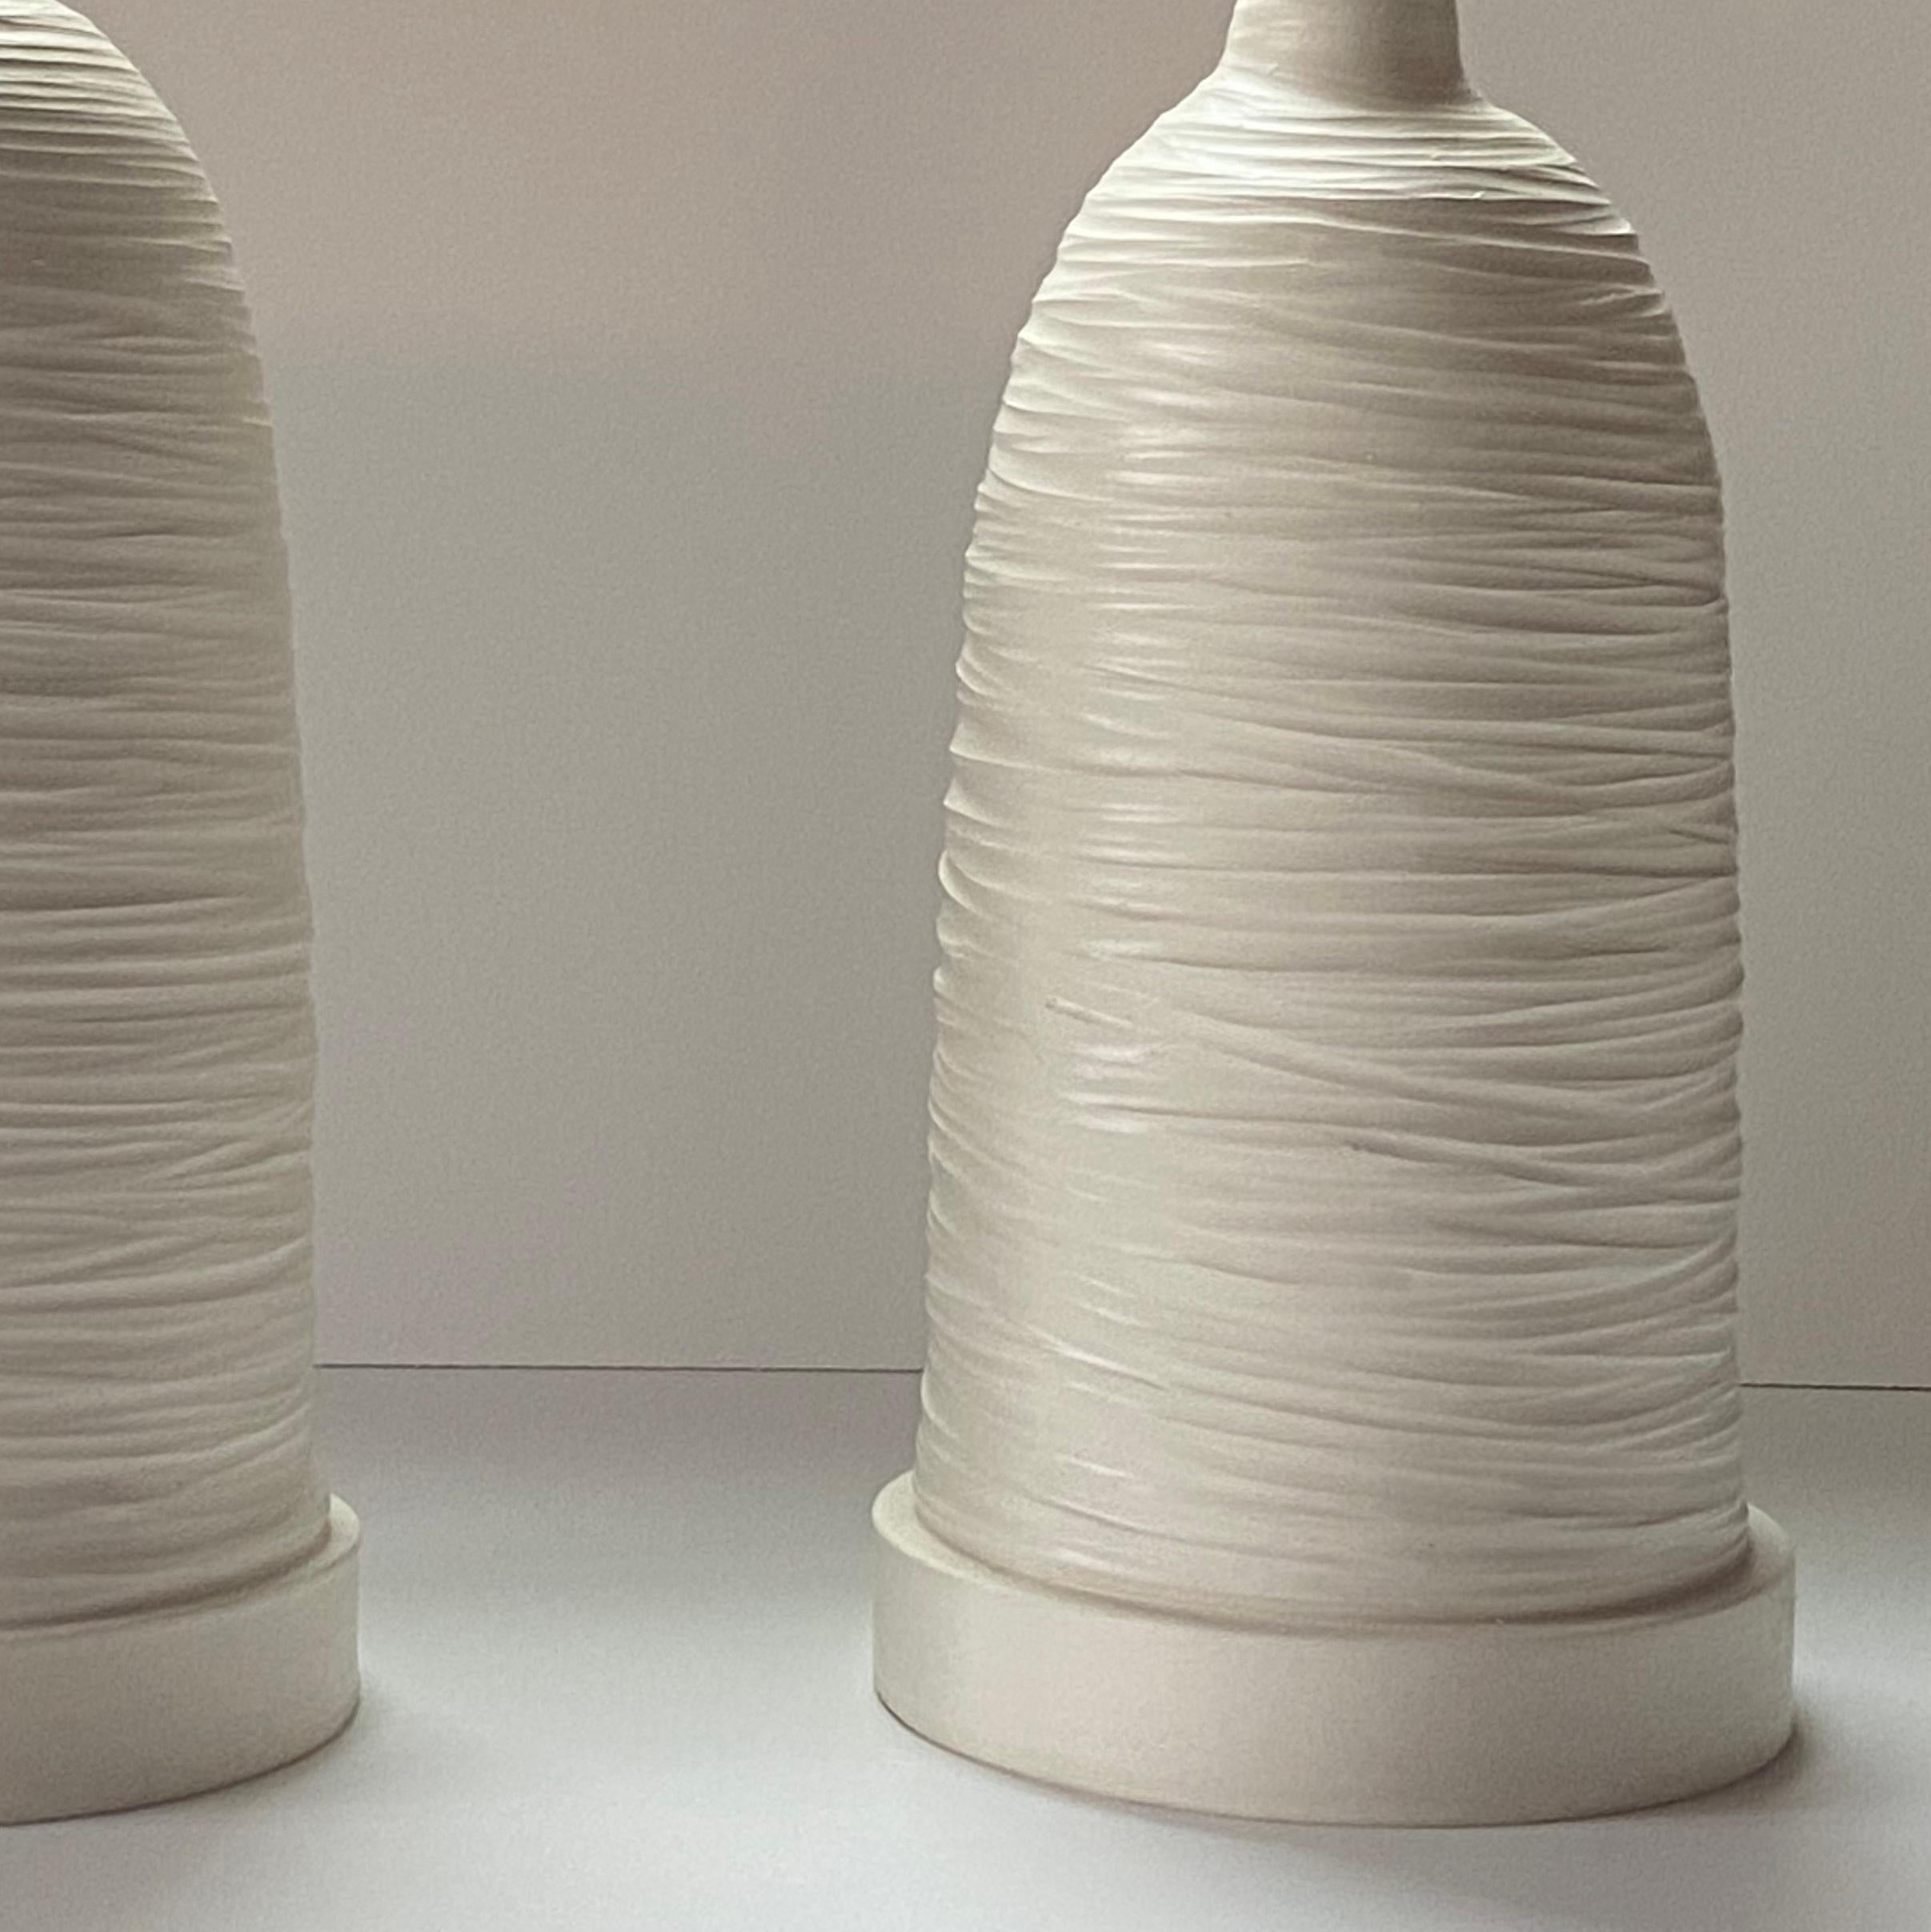 Ceramic Handmade Wheel-thrown Large Lamp pair Textured deco by Olivia Barry / By Hand For Sale